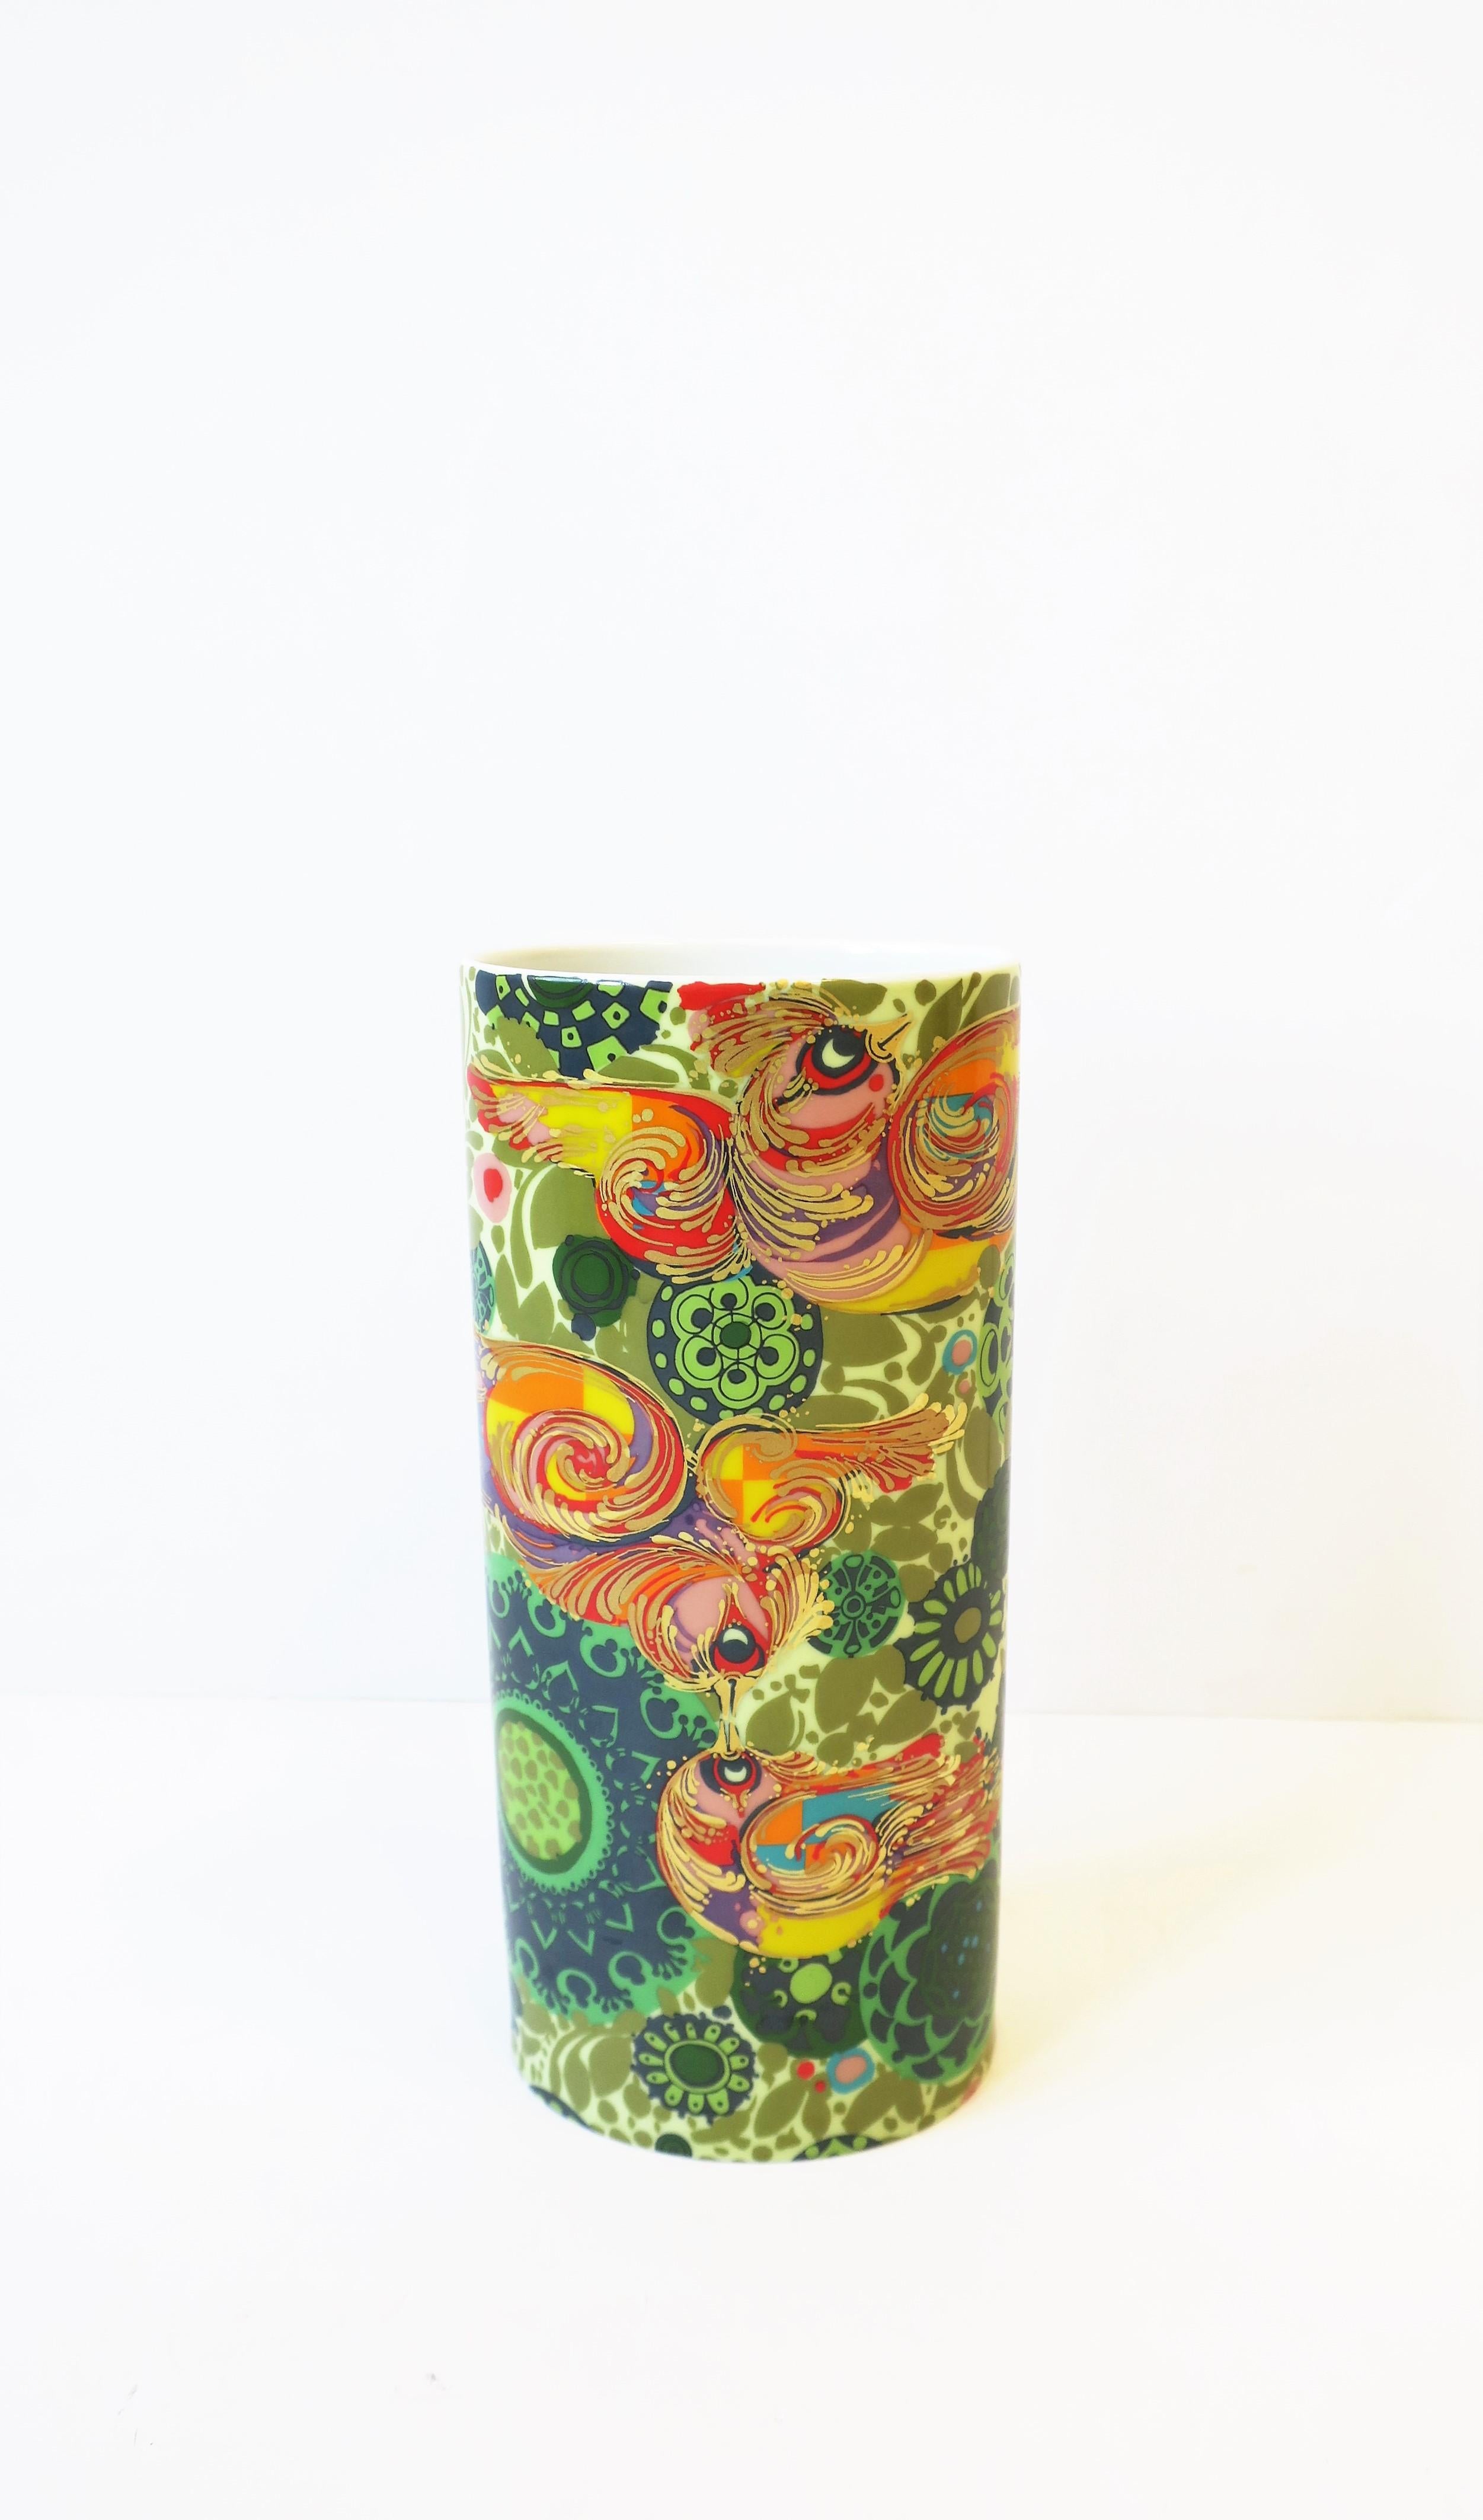 A beautiful German porcelain vase by Danish artist and designer Bjorn Wiinblad for Rosenthal Studio-Line, circa 1970s, 20th century, Germany. A colorful palate with gold bird design. With designer and marker's mark on bottom as show in image #13. A